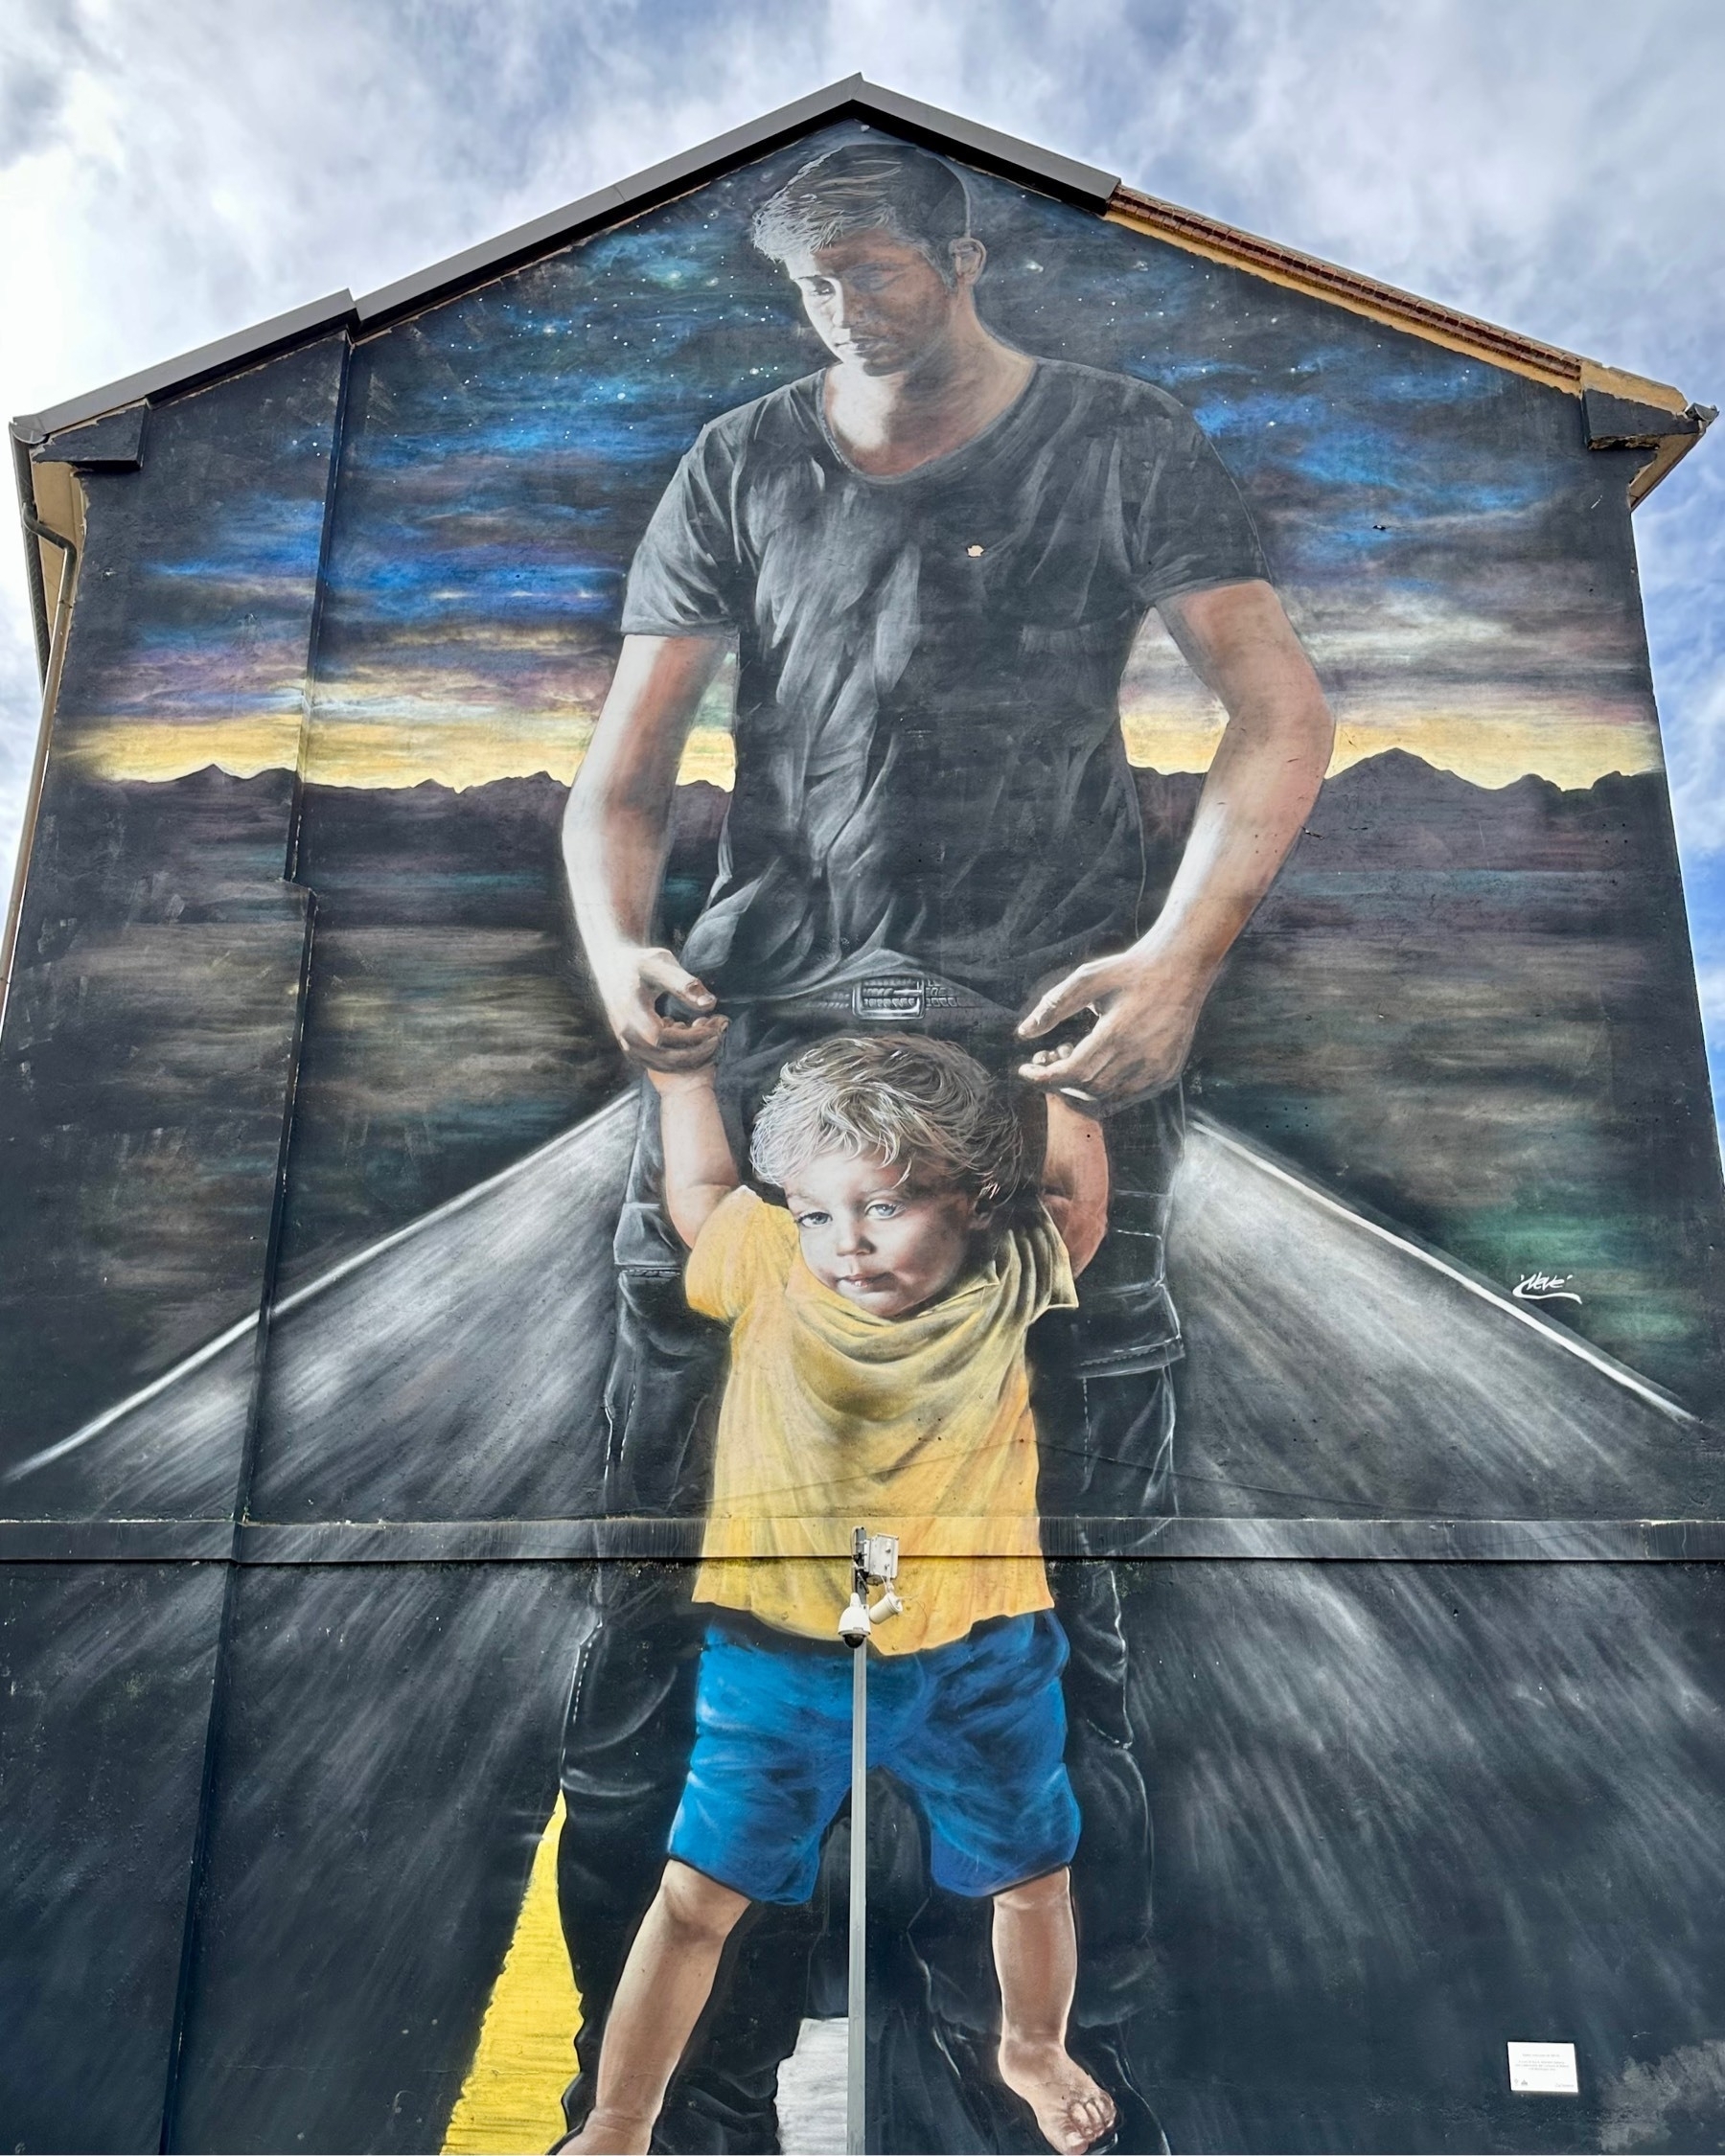 Lifelike mural on the side of a building, showing a man leading a child down a road